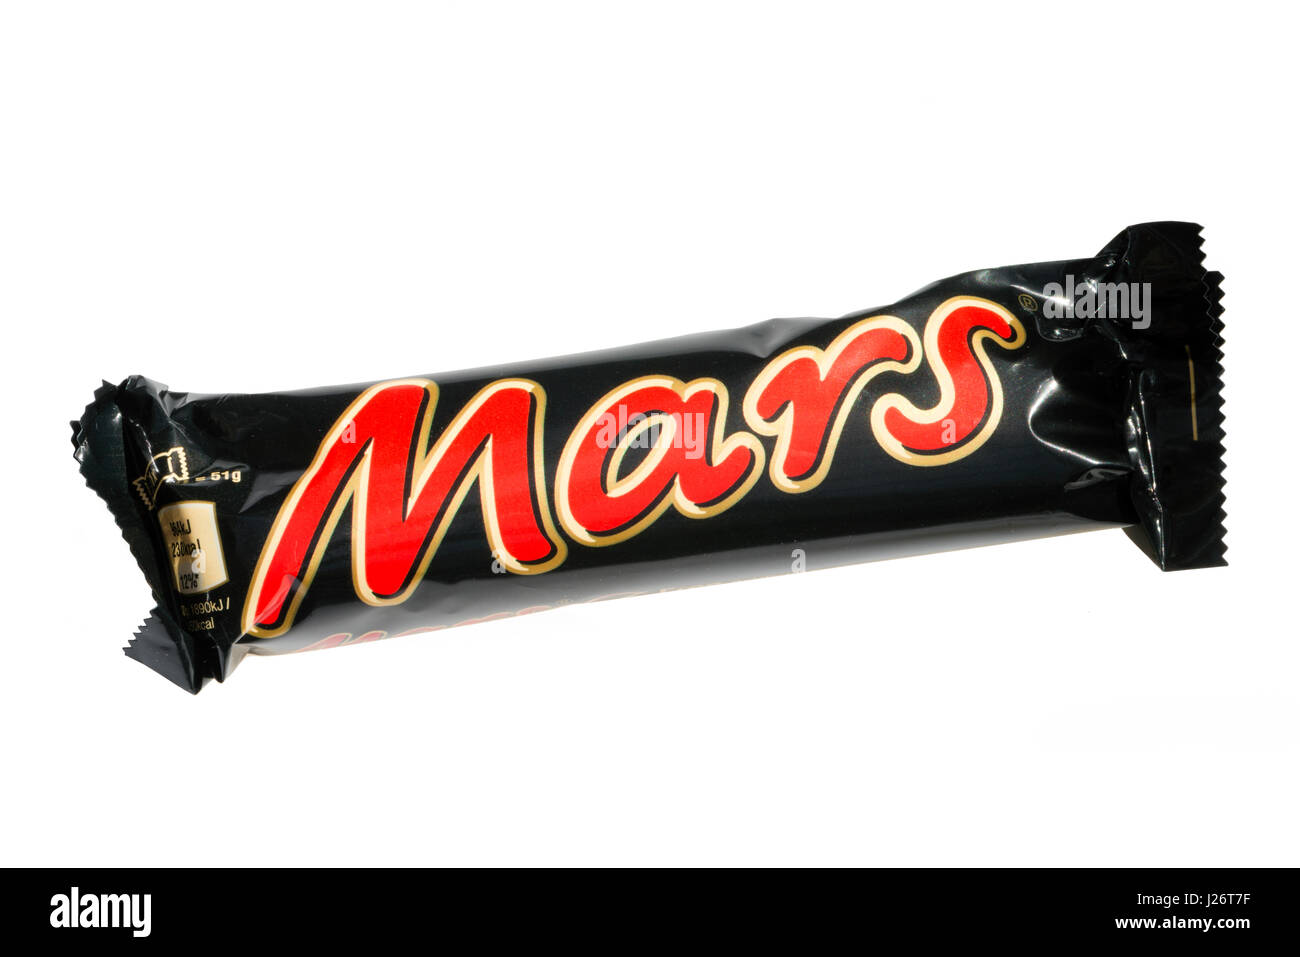 Mars Bar cut out or isolated against a white background Stock Photo